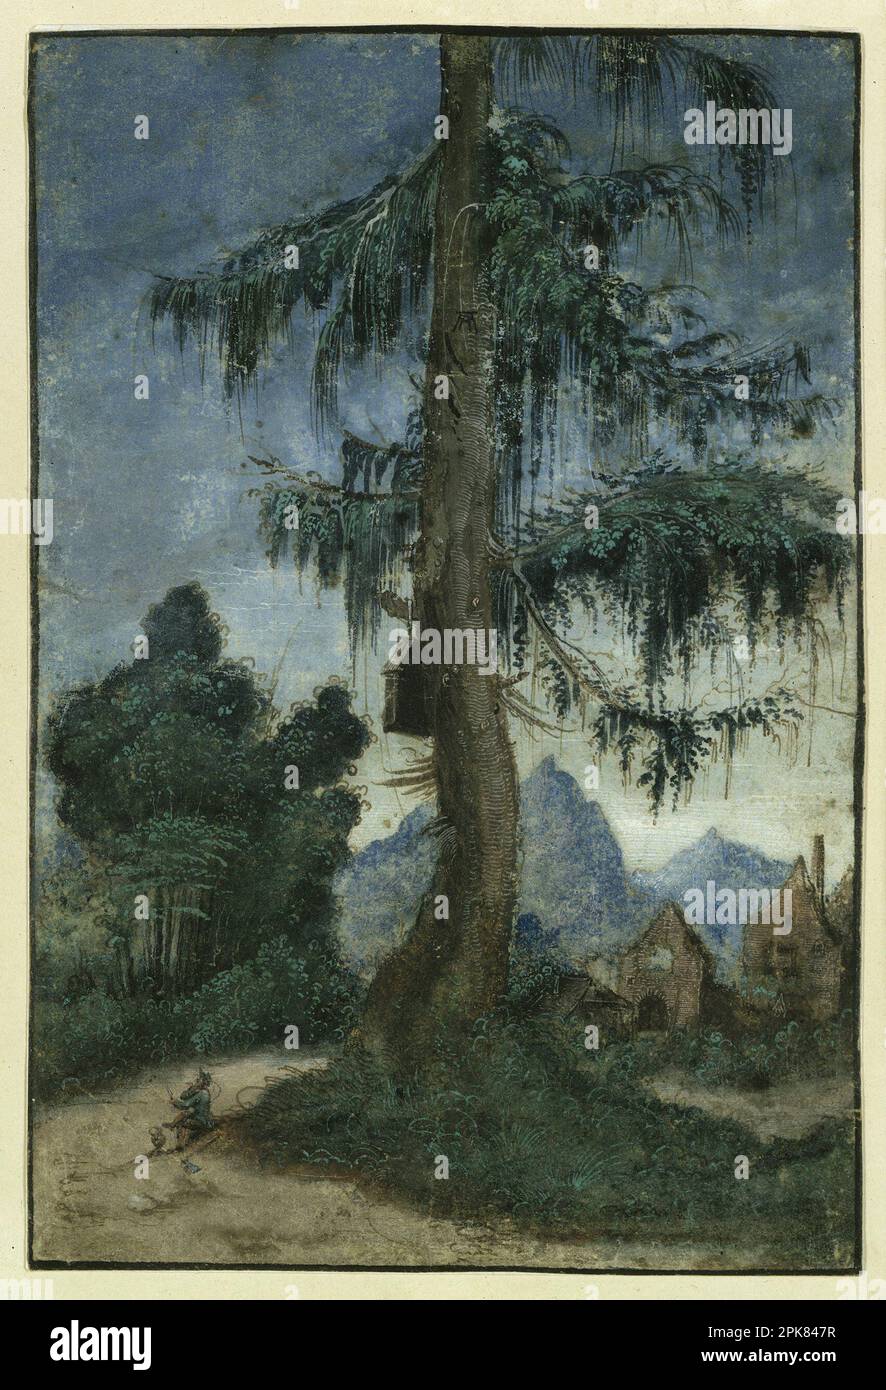 Landscape with spruce circa 1522 by Albrecht Altdorfer Stock Photo